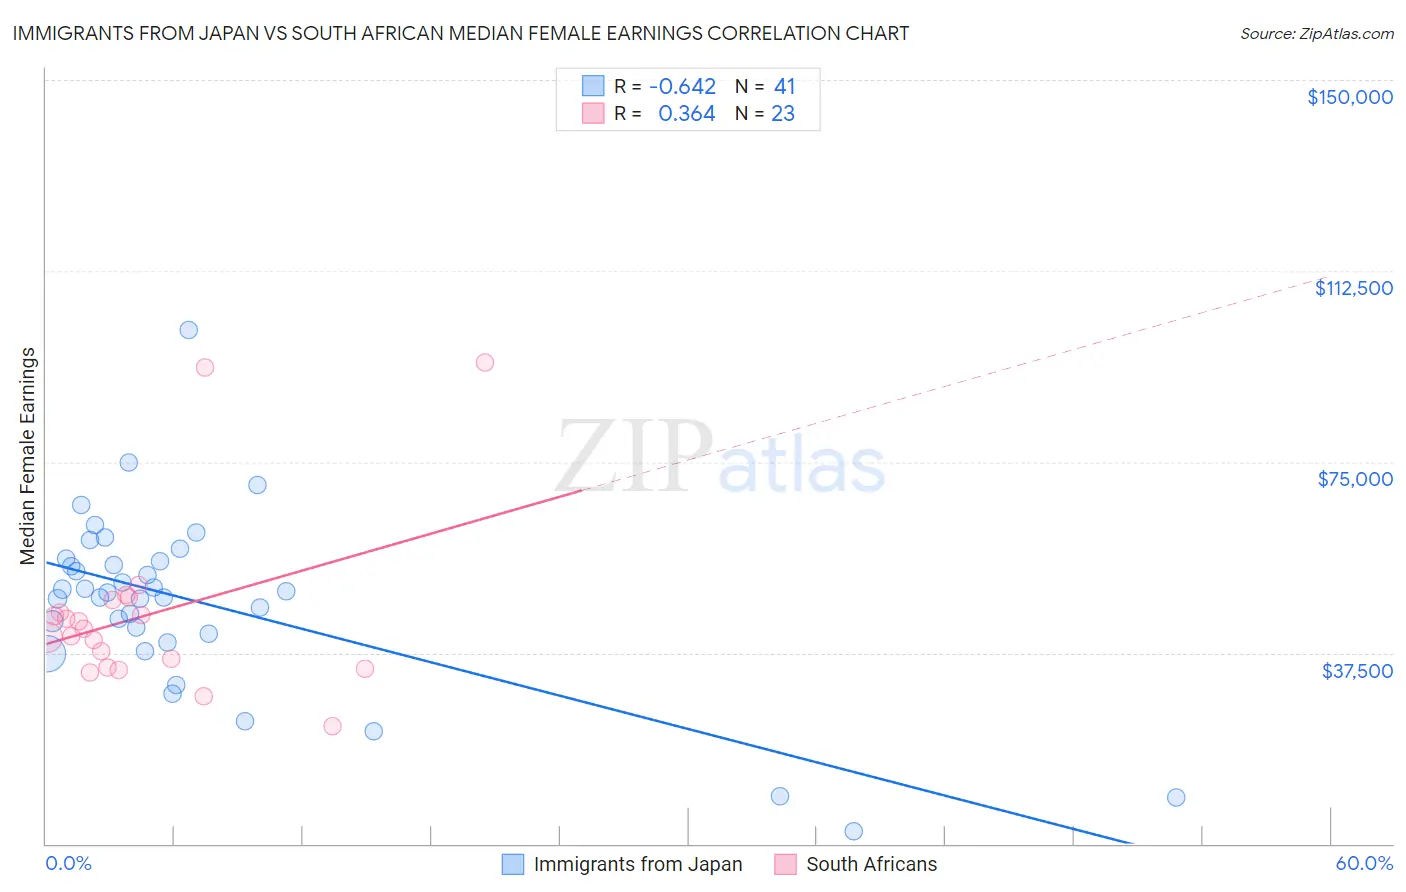 Immigrants from Japan vs South African Median Female Earnings